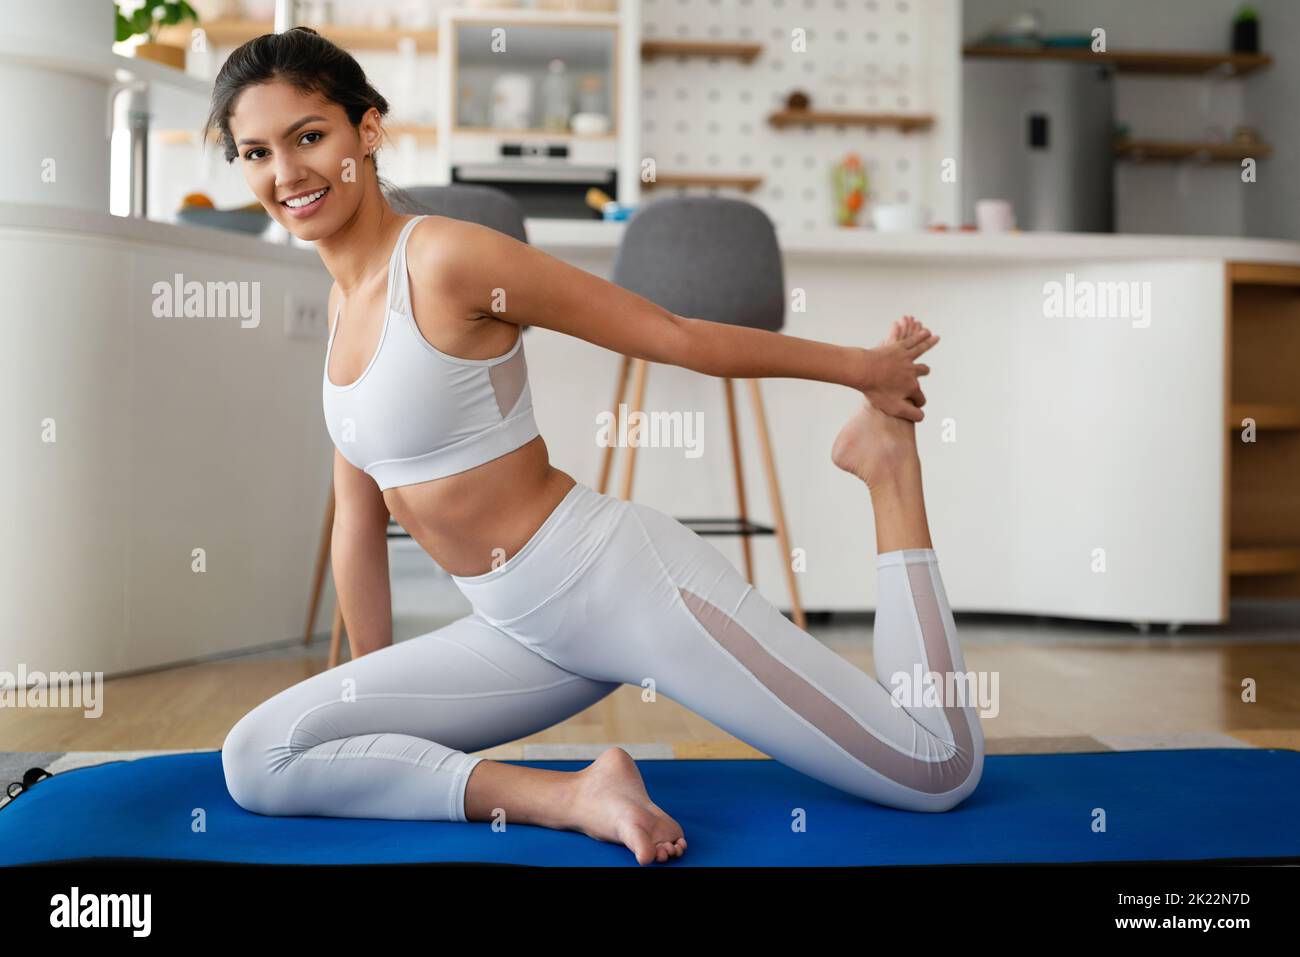 Stay at home. Fitness at home during quarantine. Young attractive woman in sportswear training Stock Photo